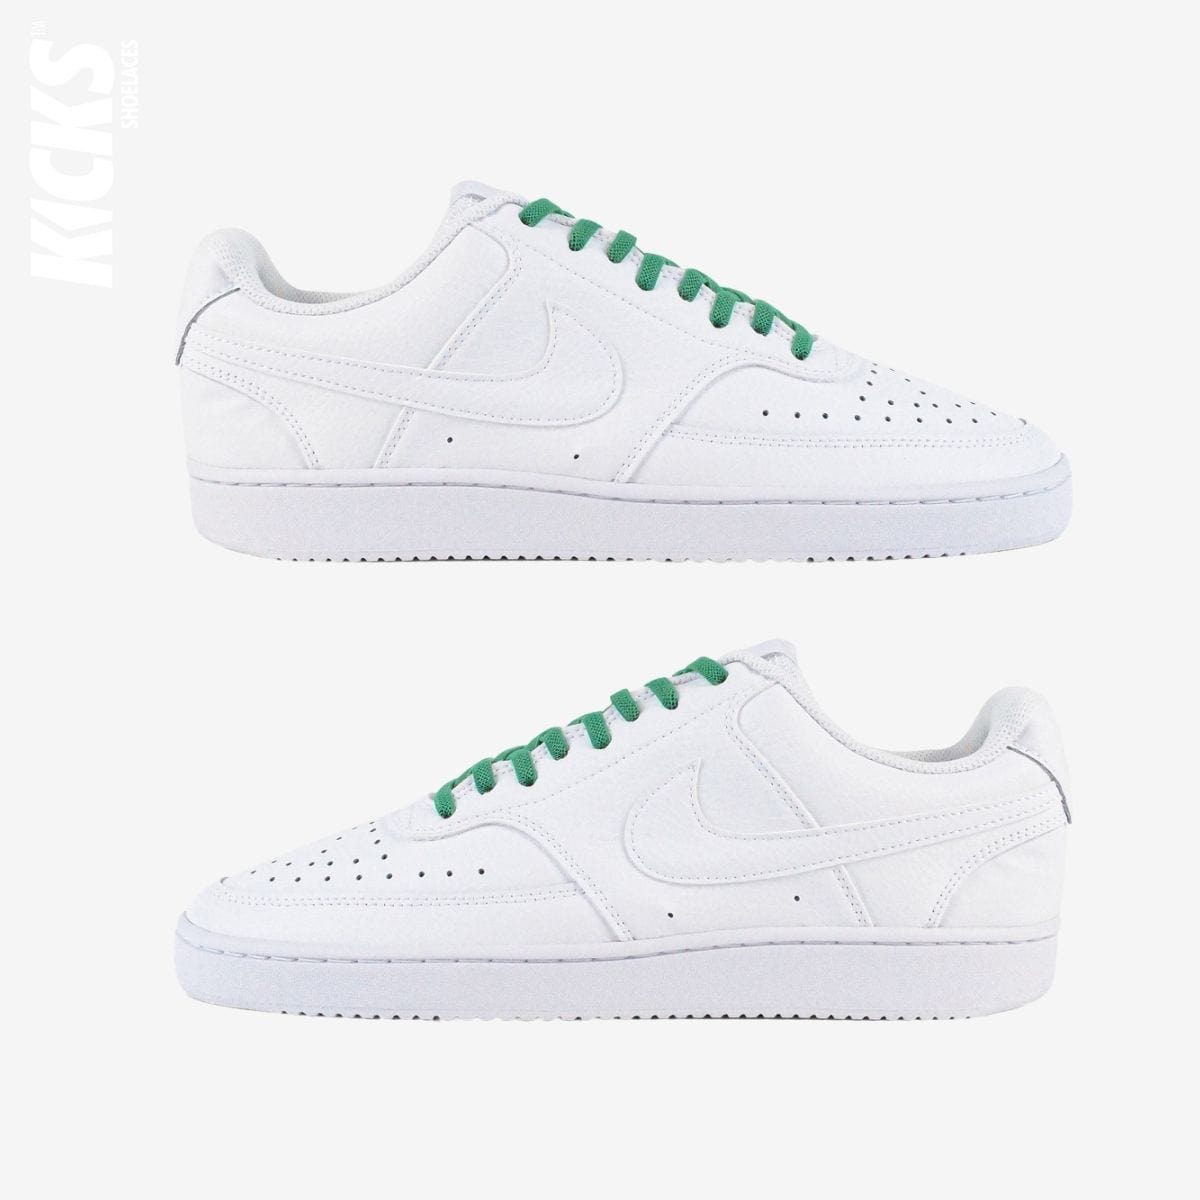 tieless-laces-with-green-laces-on-nike-white-sneakers-by-kicks-shoelaces